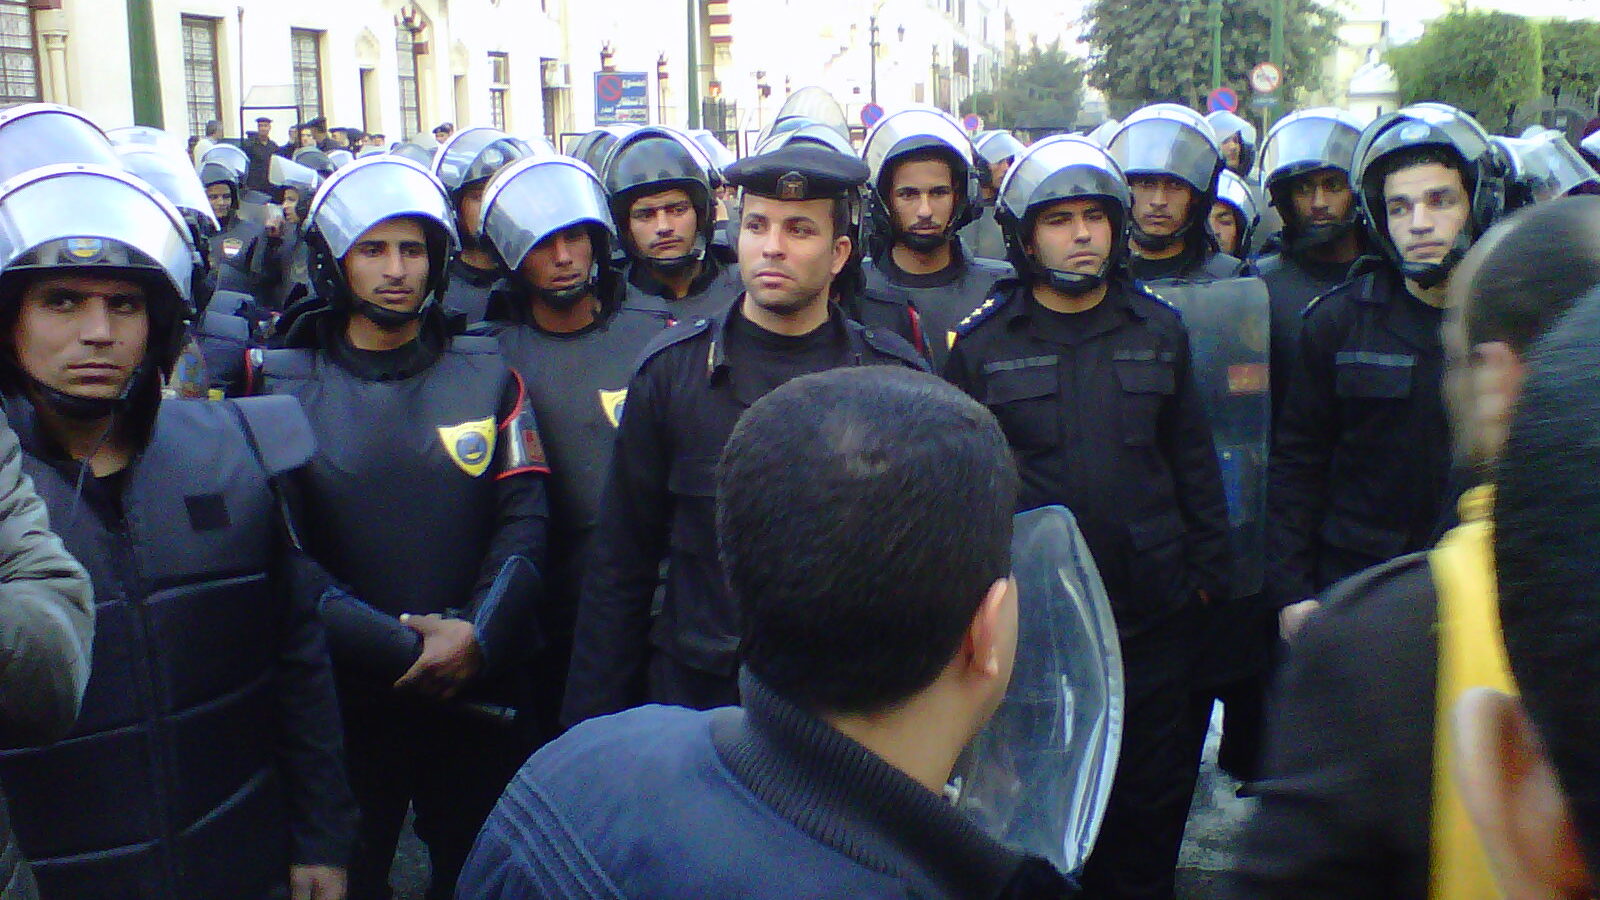 The Egyptian National Police Day